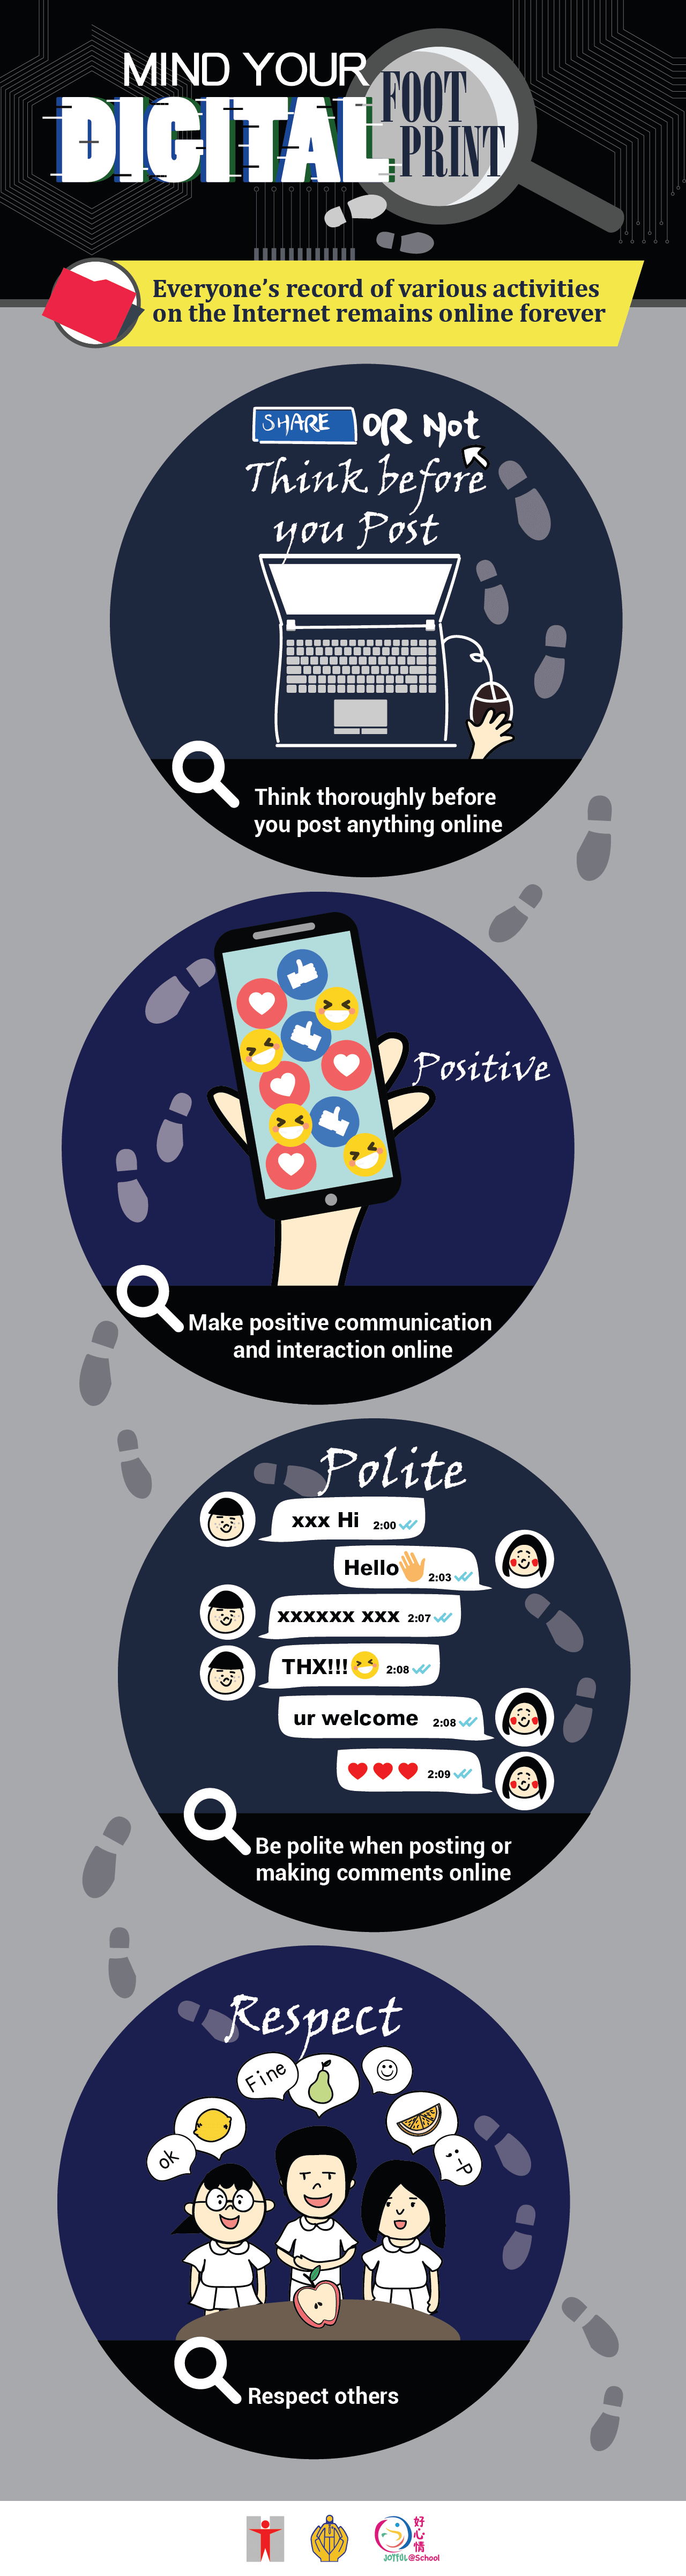 (Info-graphic) Mind your Digital Footprint/Digital Footprint – one’s record of various activities on the Internet, remains online forever/Think thoroughly before you post anything online/Make positive communication and interaction online/Be polite when posting or making comments online/Respect others